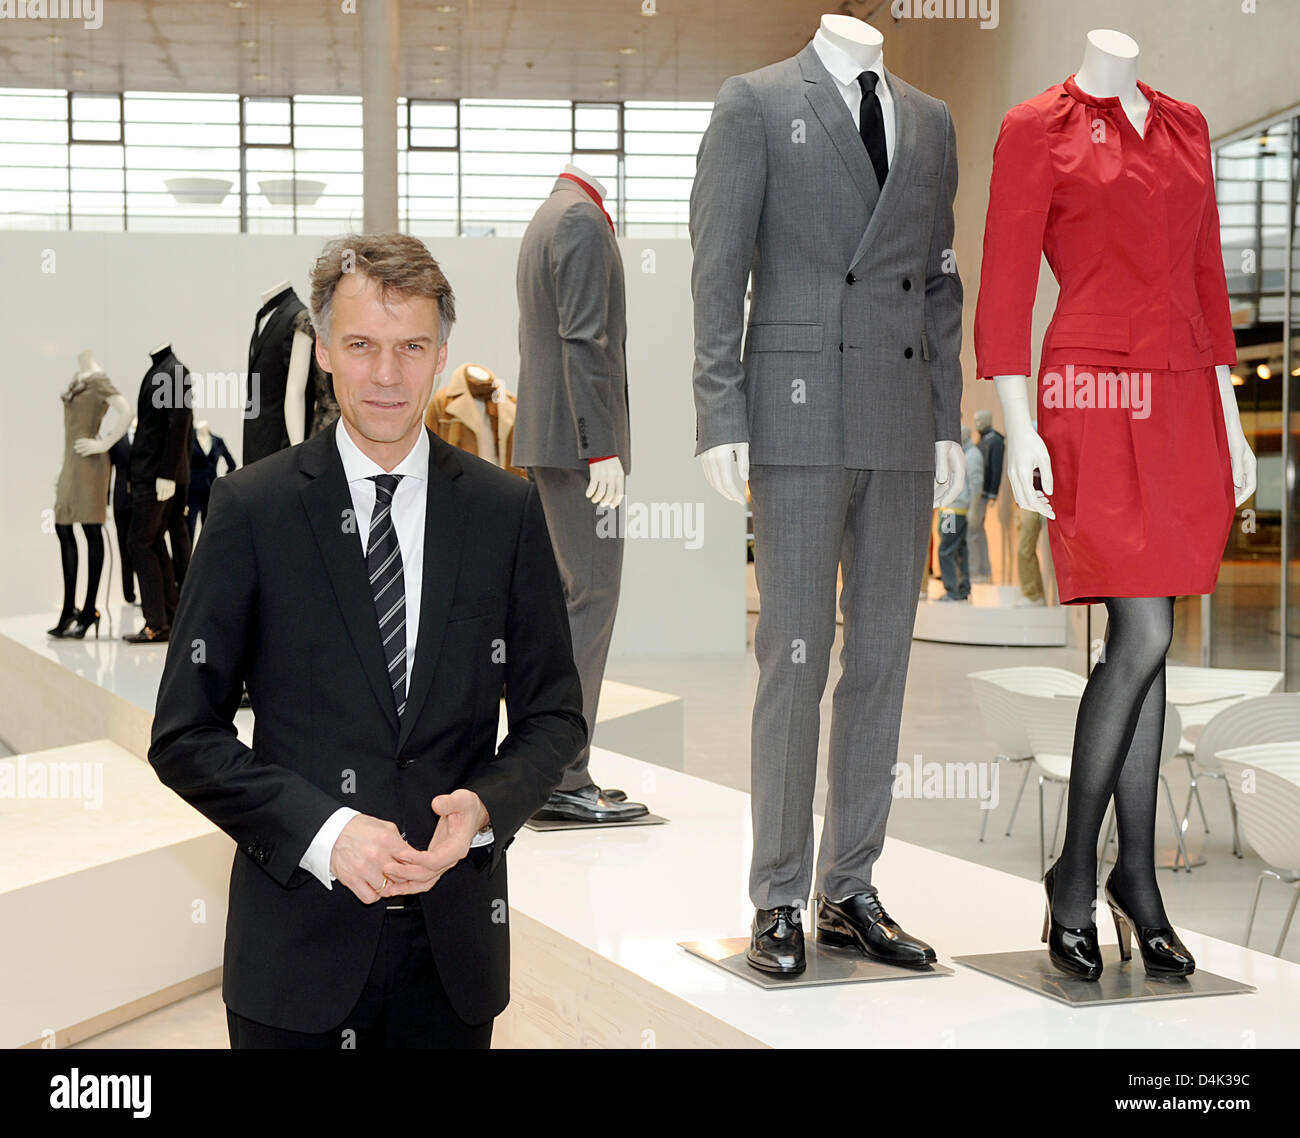 Claus-Dietrich Lahrs, CEO of fashion label Hugo Boss, poses with mannequins  prior to the balance press conference in Metzingen, Germany, 26 March 2009.  For Hugo Boss, declining consumption has brought about a